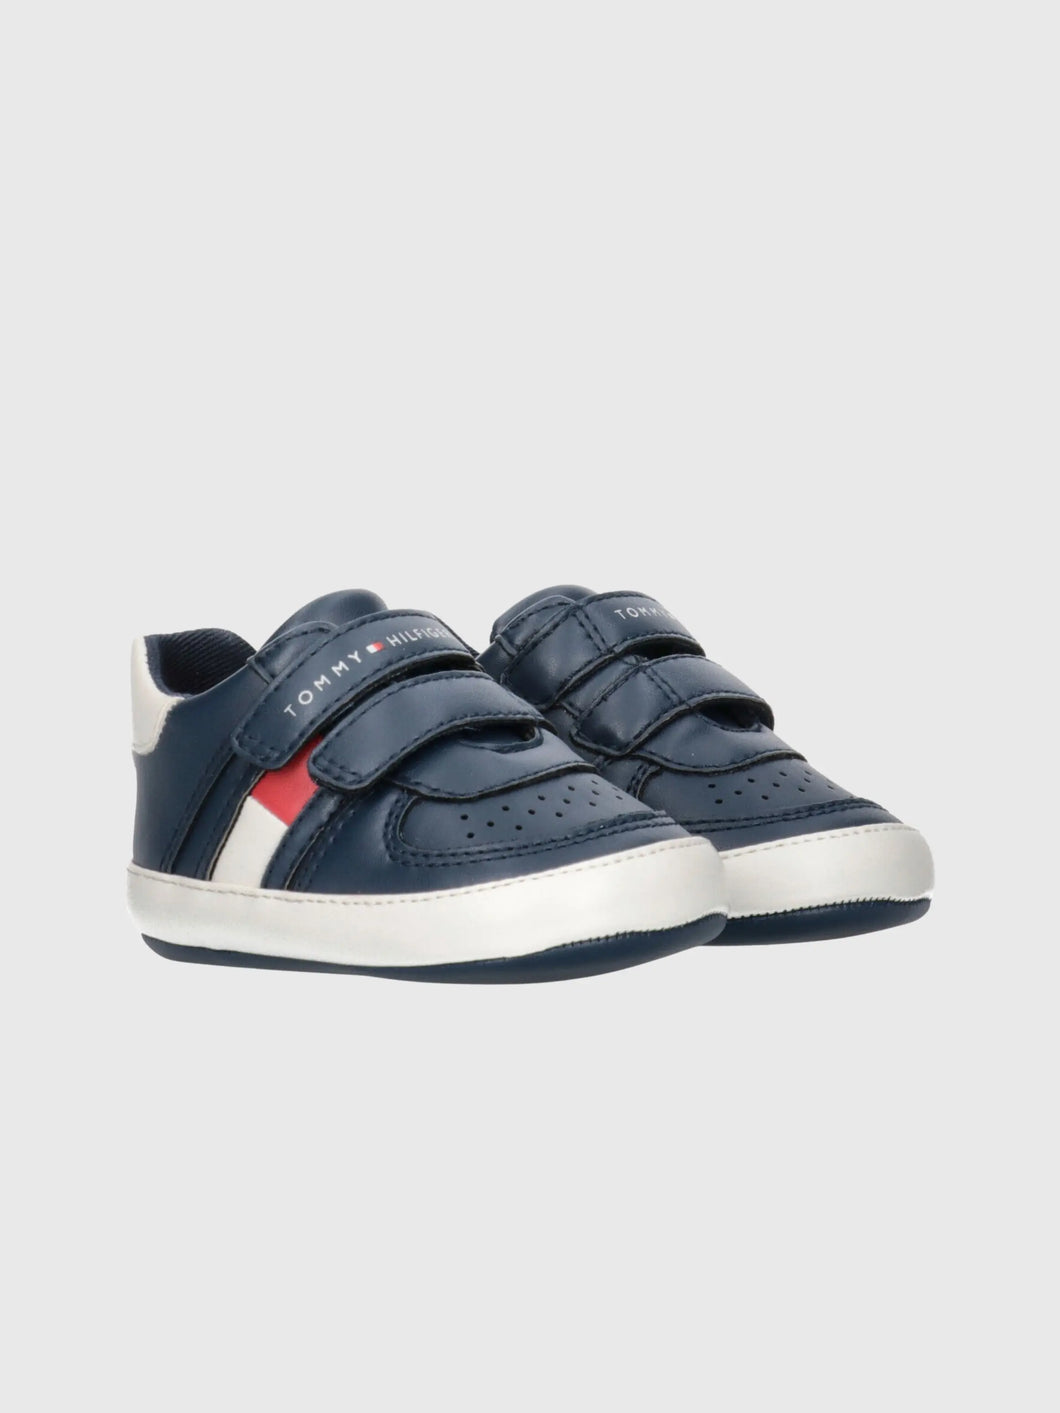 TOMMY HILFIGER Baby Boy Navy Blue Shoes